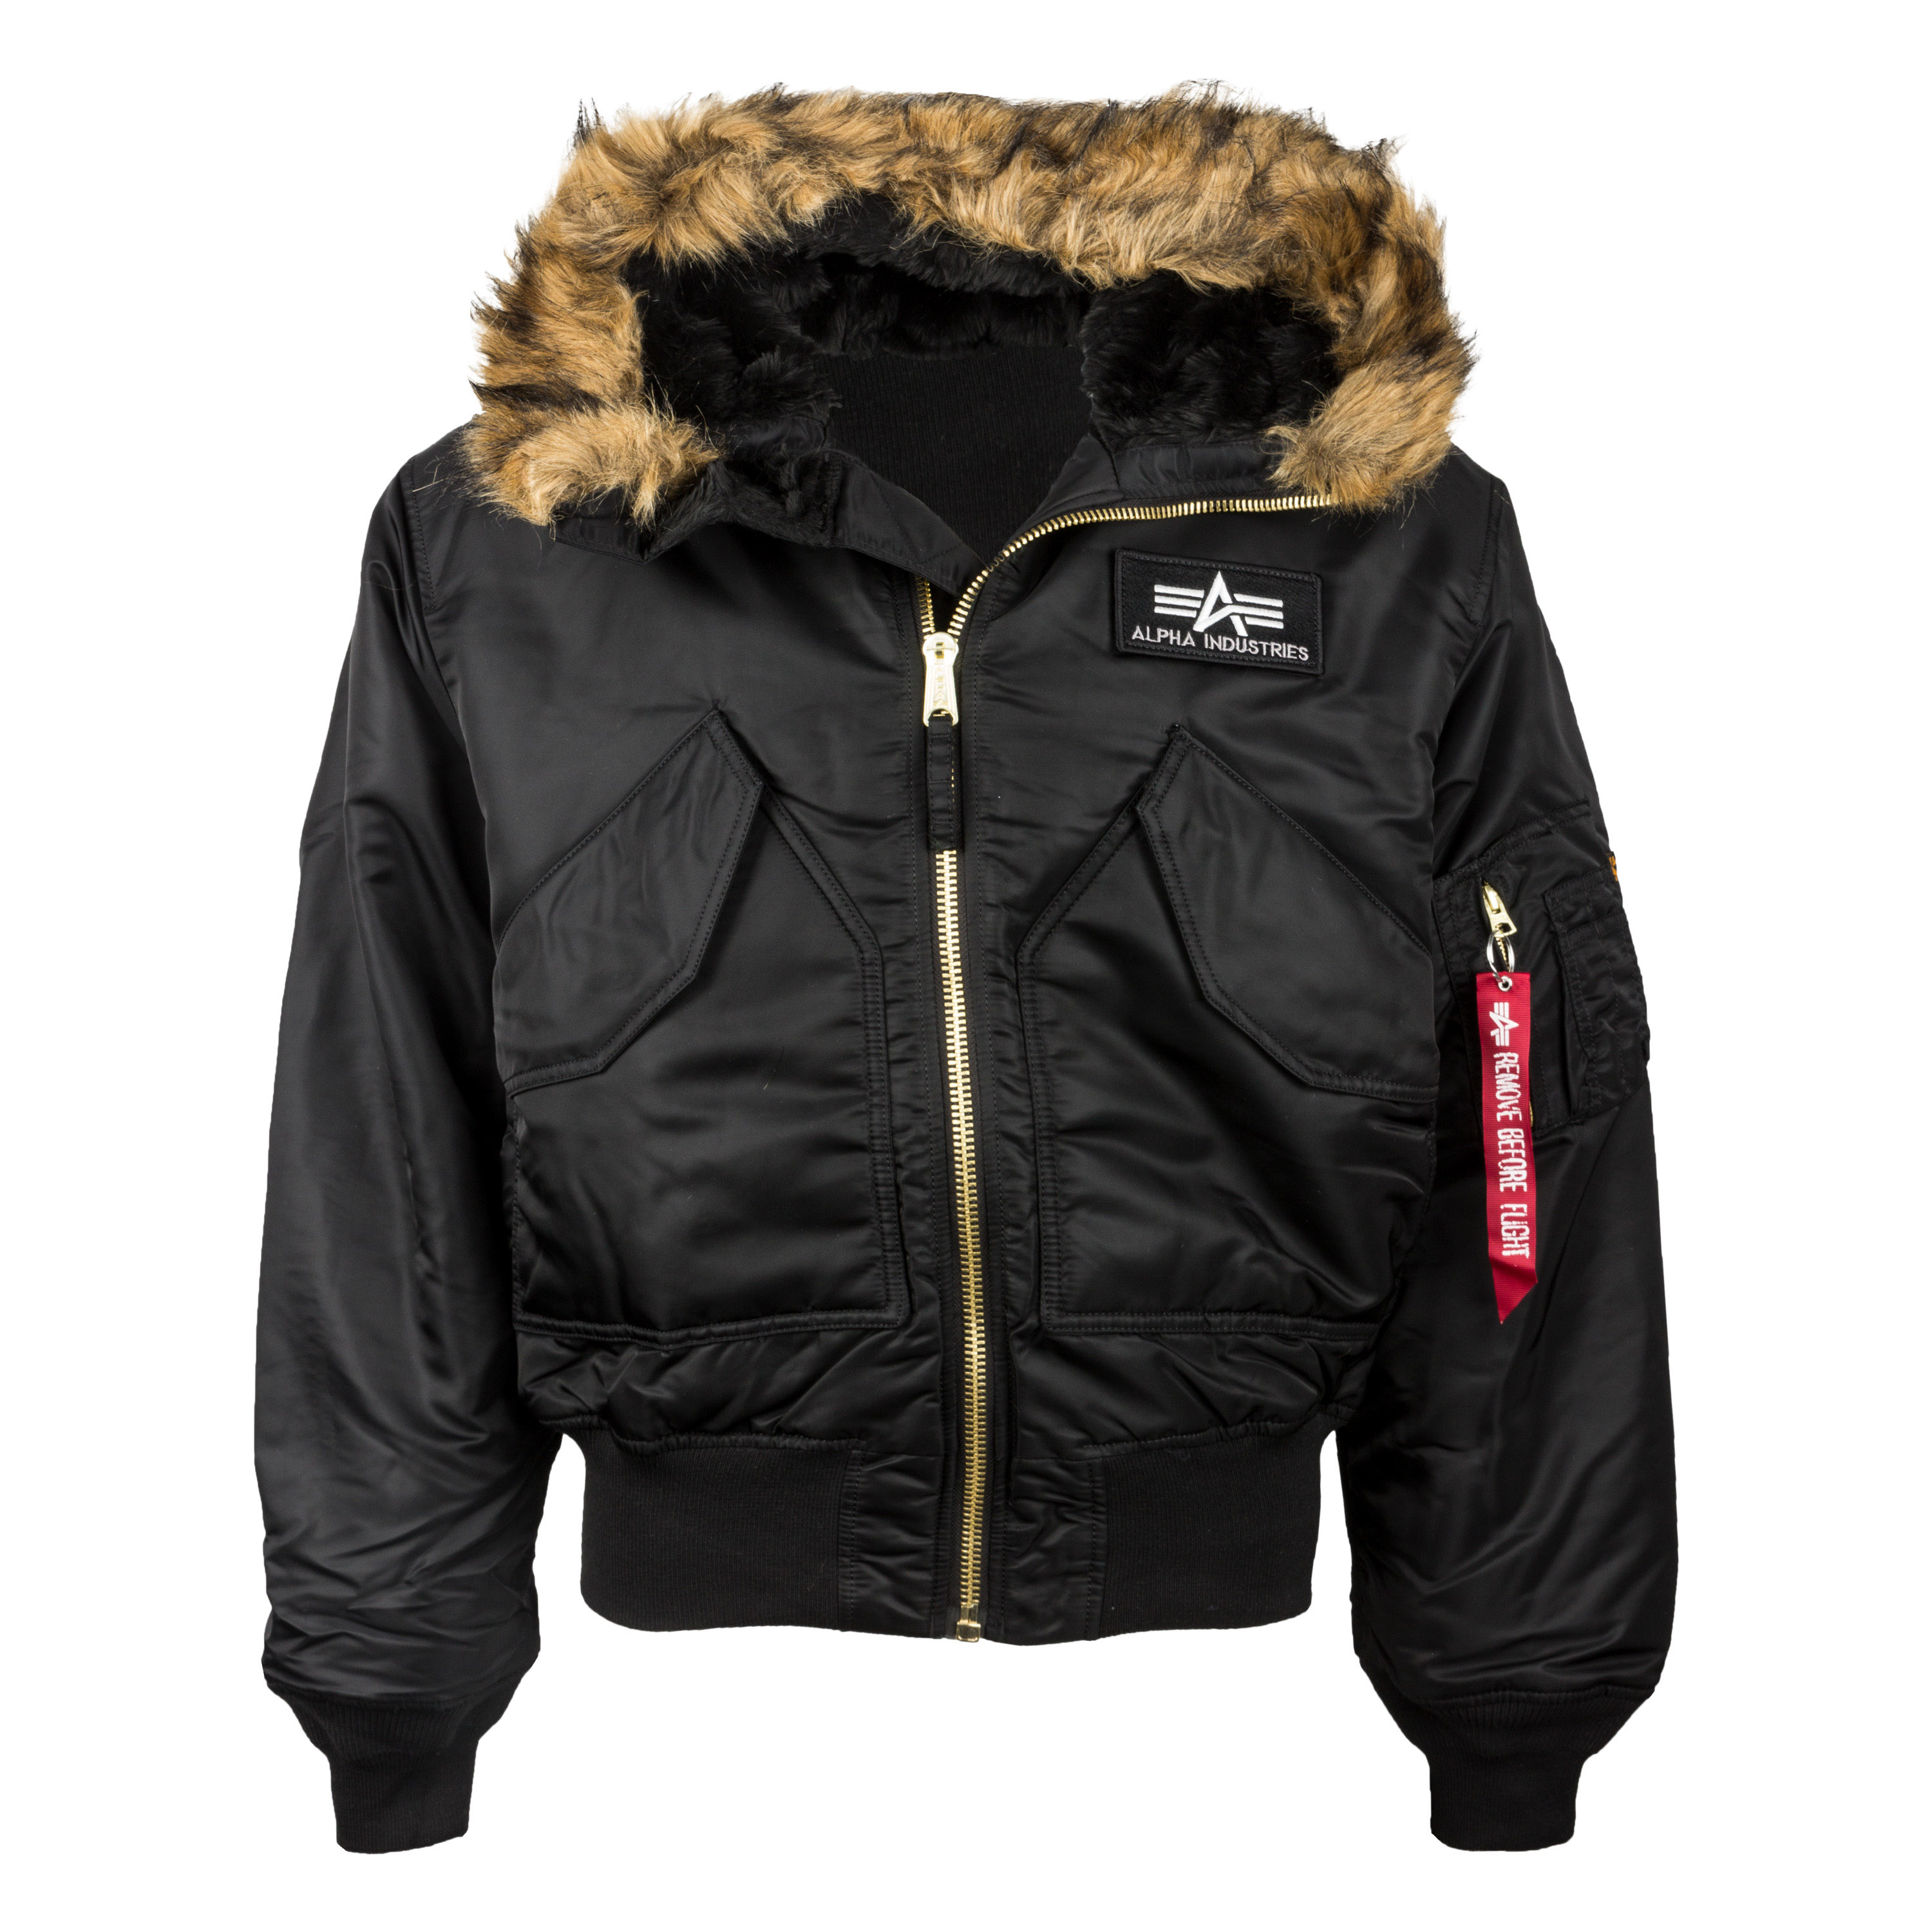 Purchase the Alpha Industries Flight Jacket 45 P Hooded black by